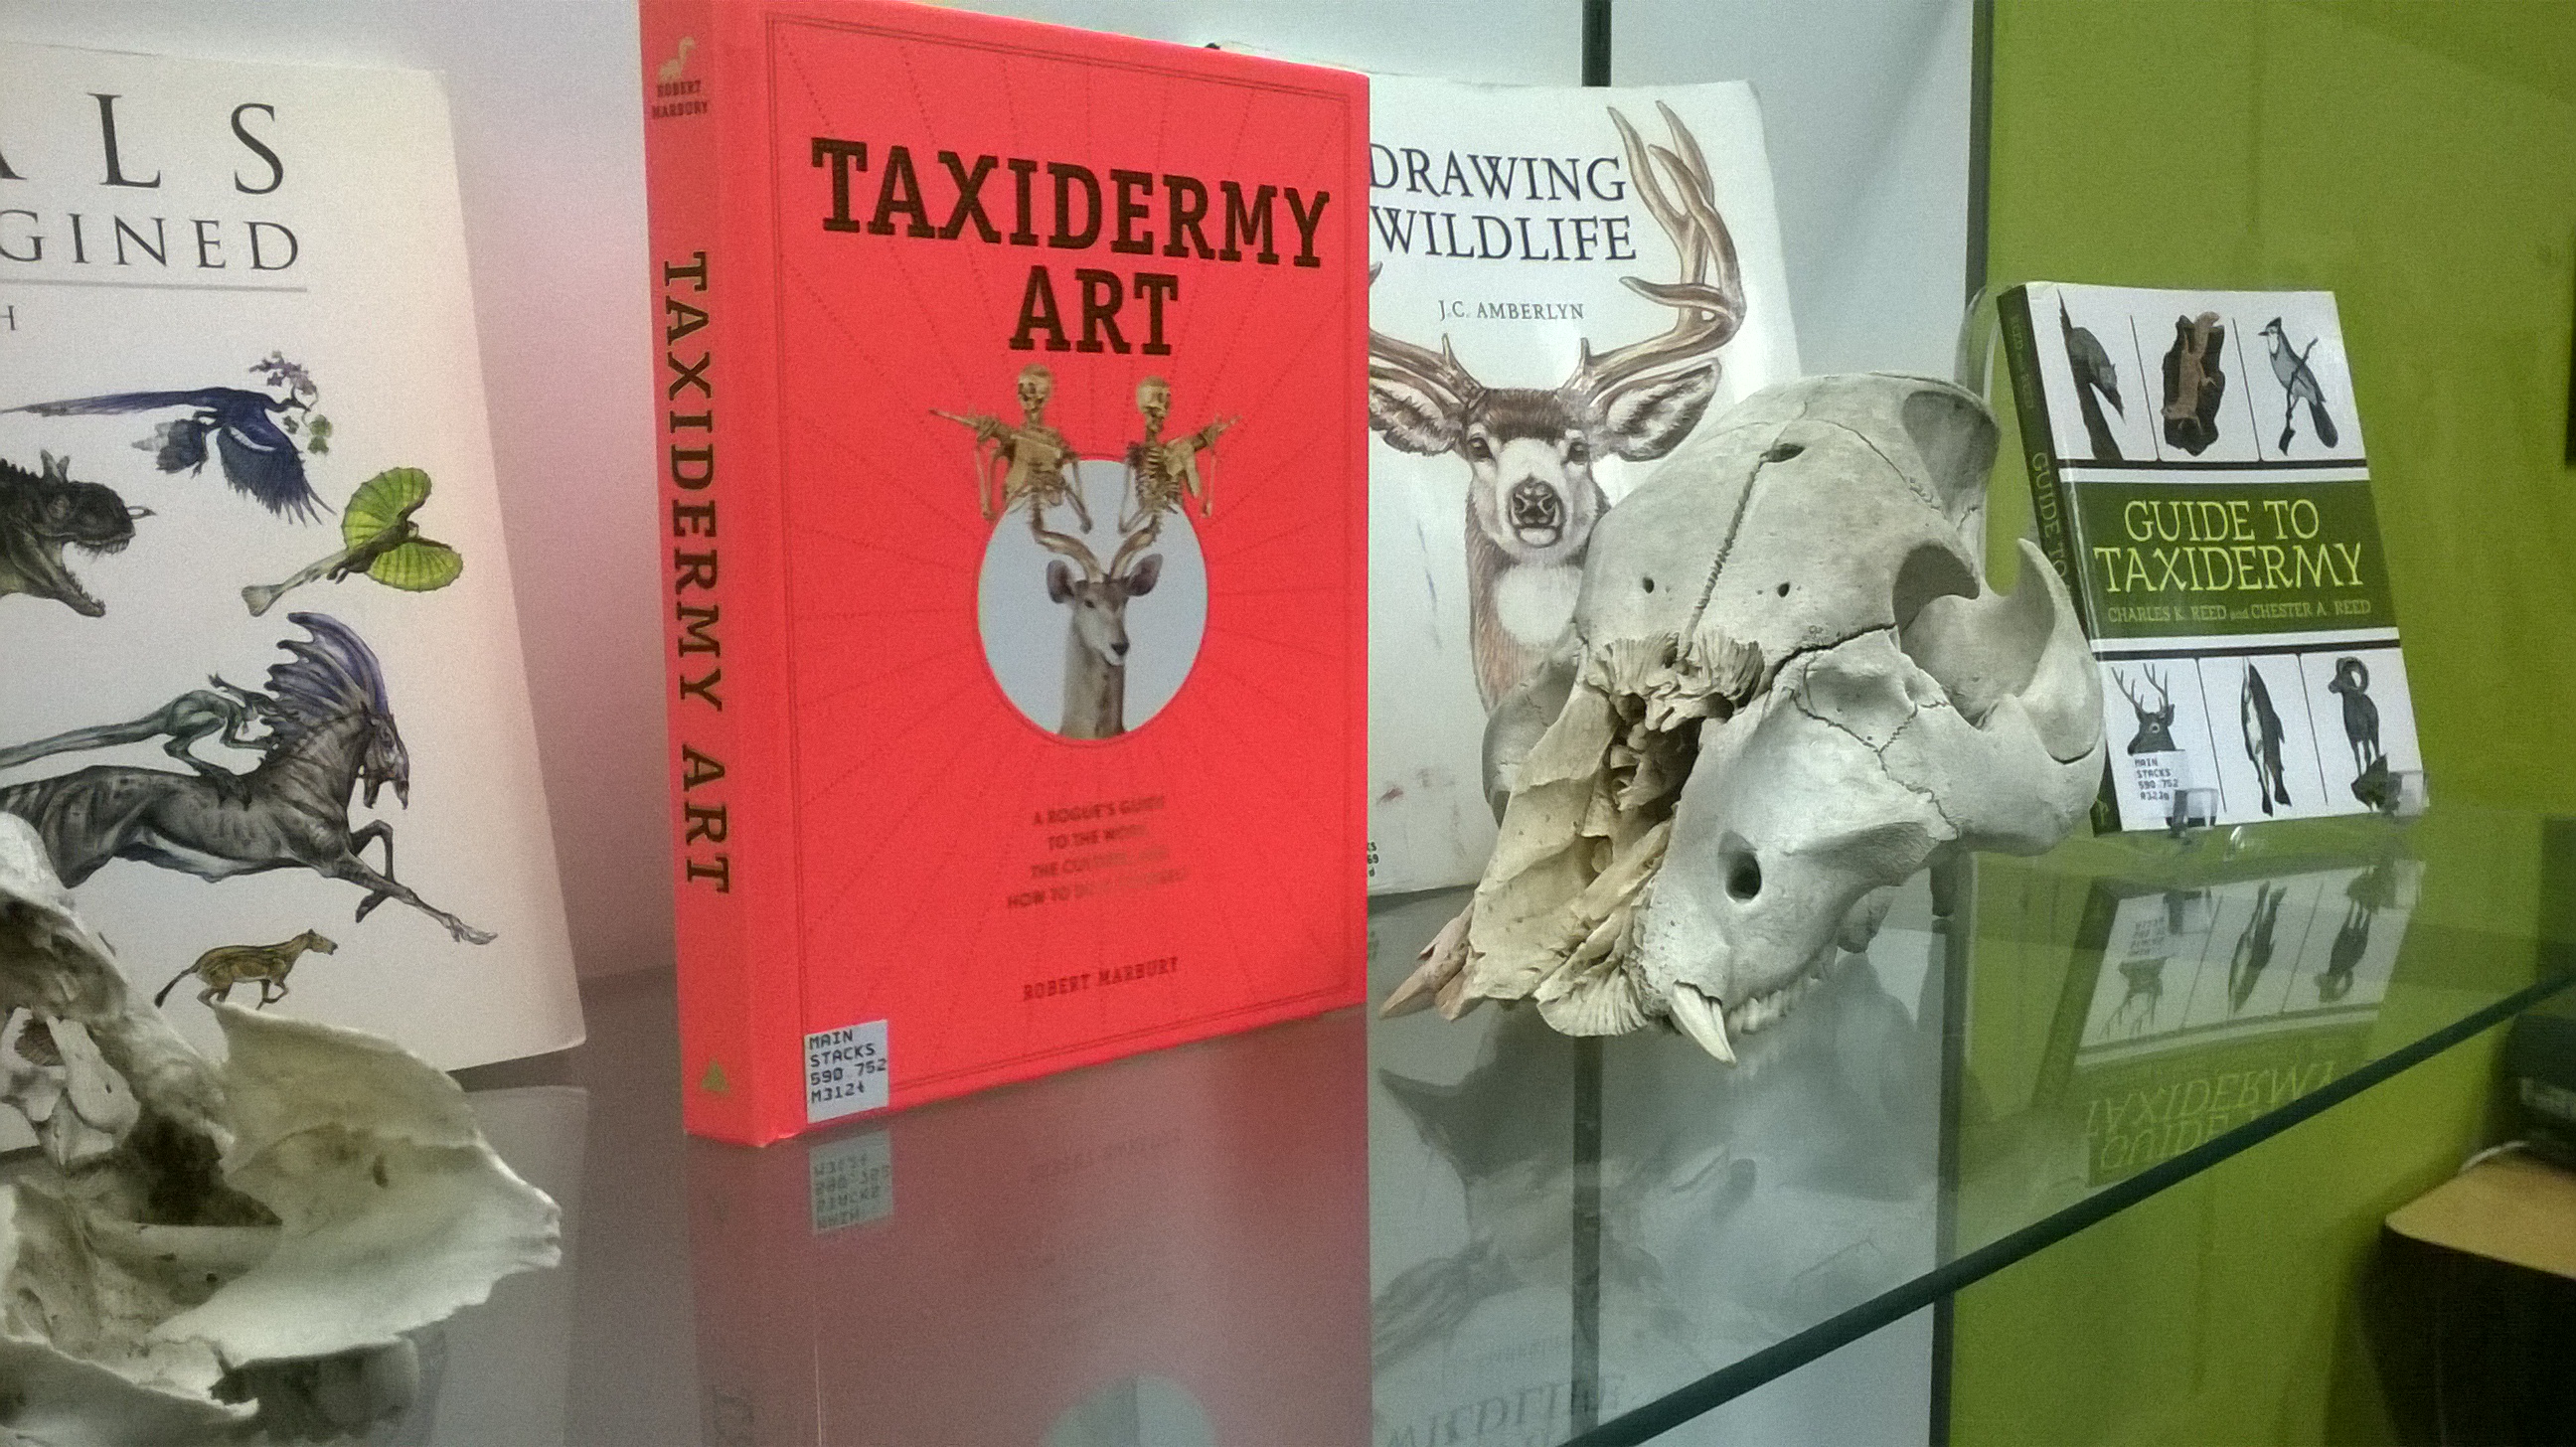 Photograph of library display. Book title reads: Taxidermy art. There is an animal skull on display next to the book.